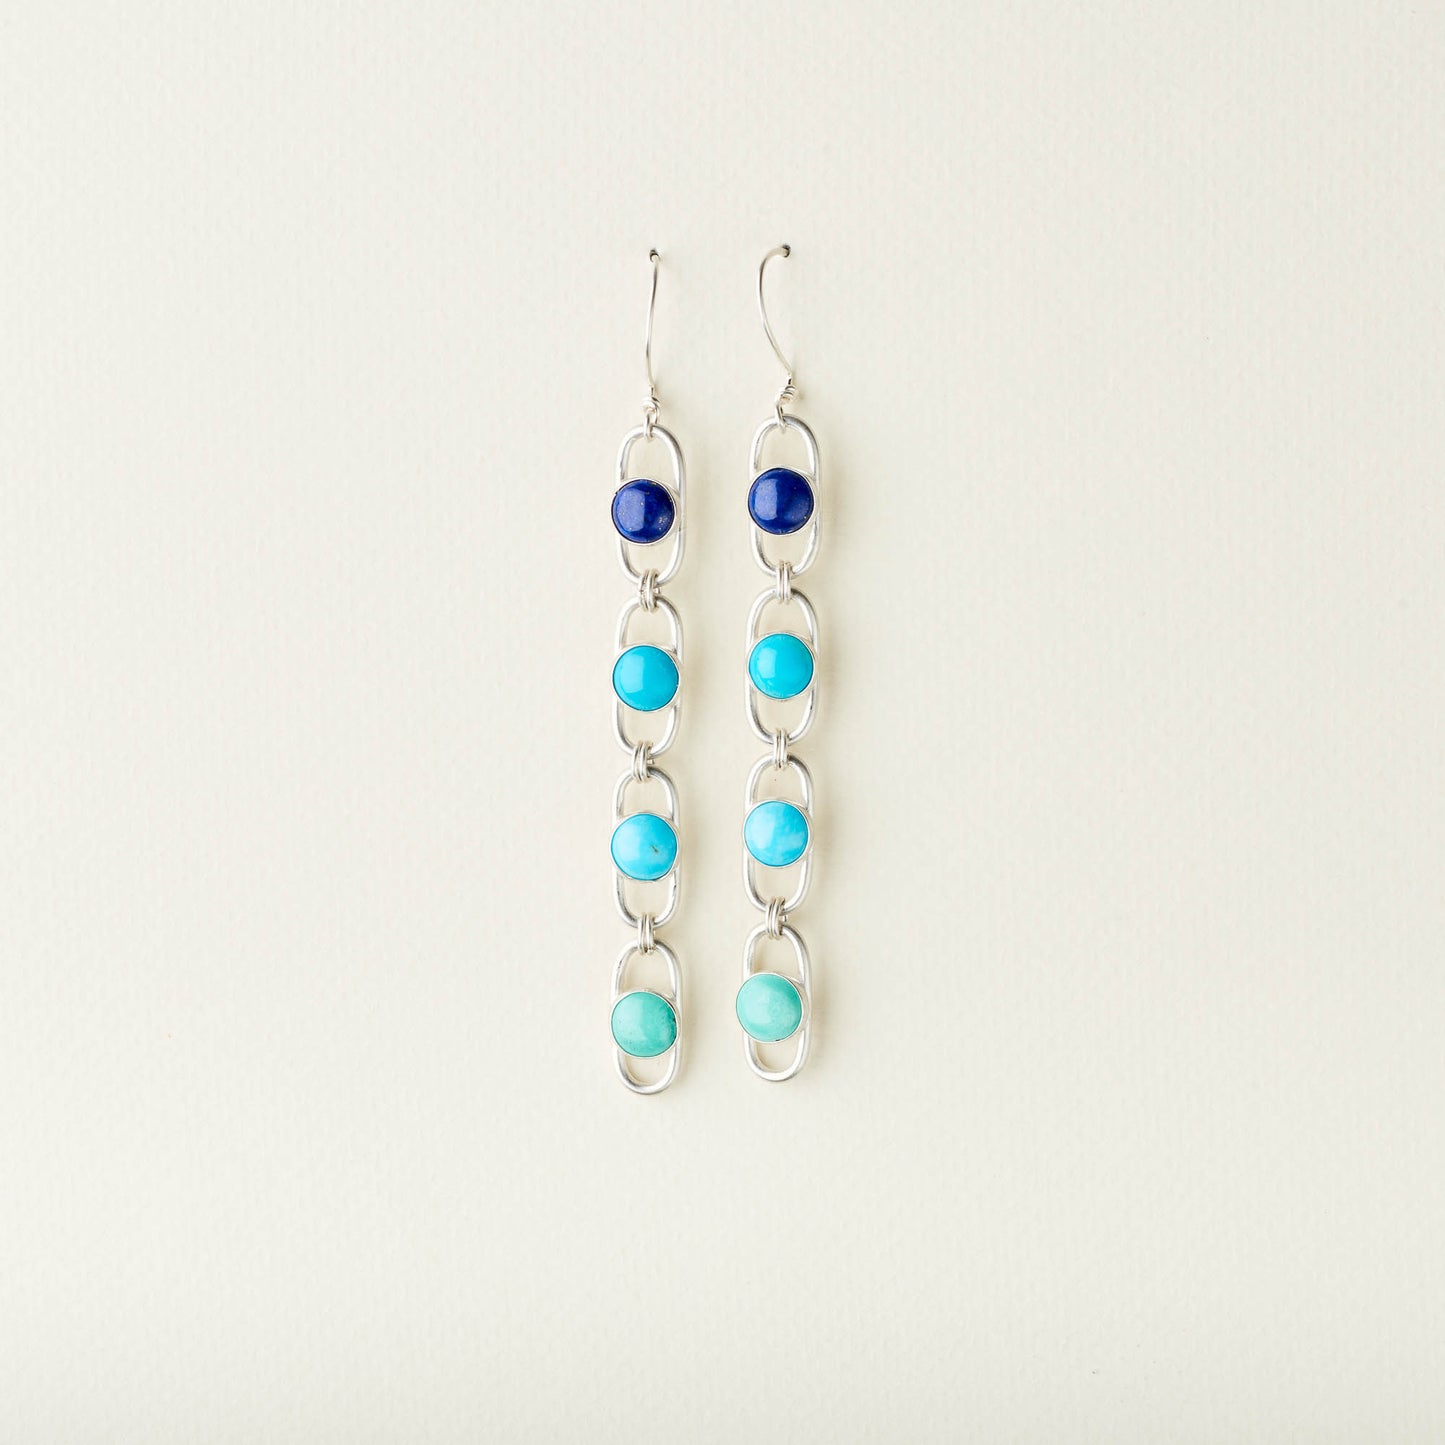 Trickle Earrings :: Lapis & Turquoise Ombre